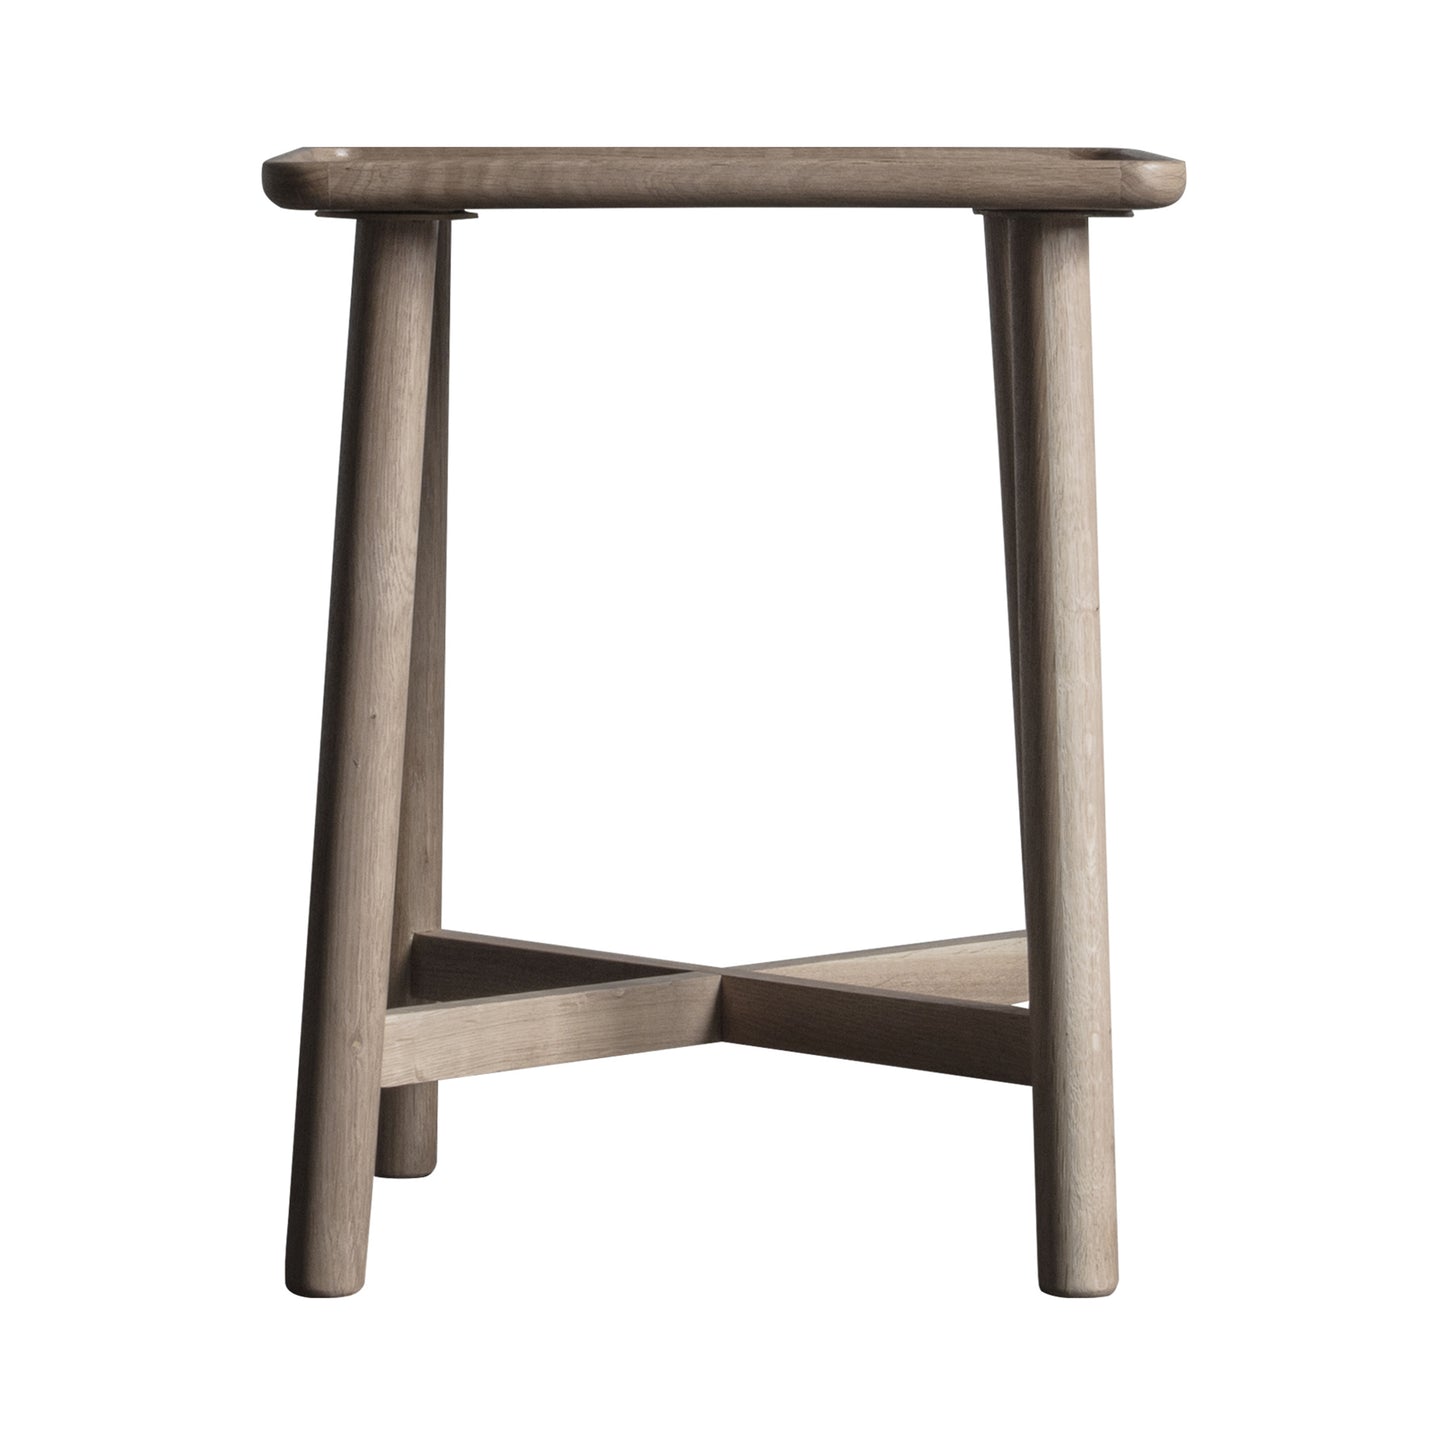 A Wembury Side Table Grey 450x450x550mm by Kikiathome.co.uk, a stylish piece of home furniture for interior decor, featuring two legs on a white background.